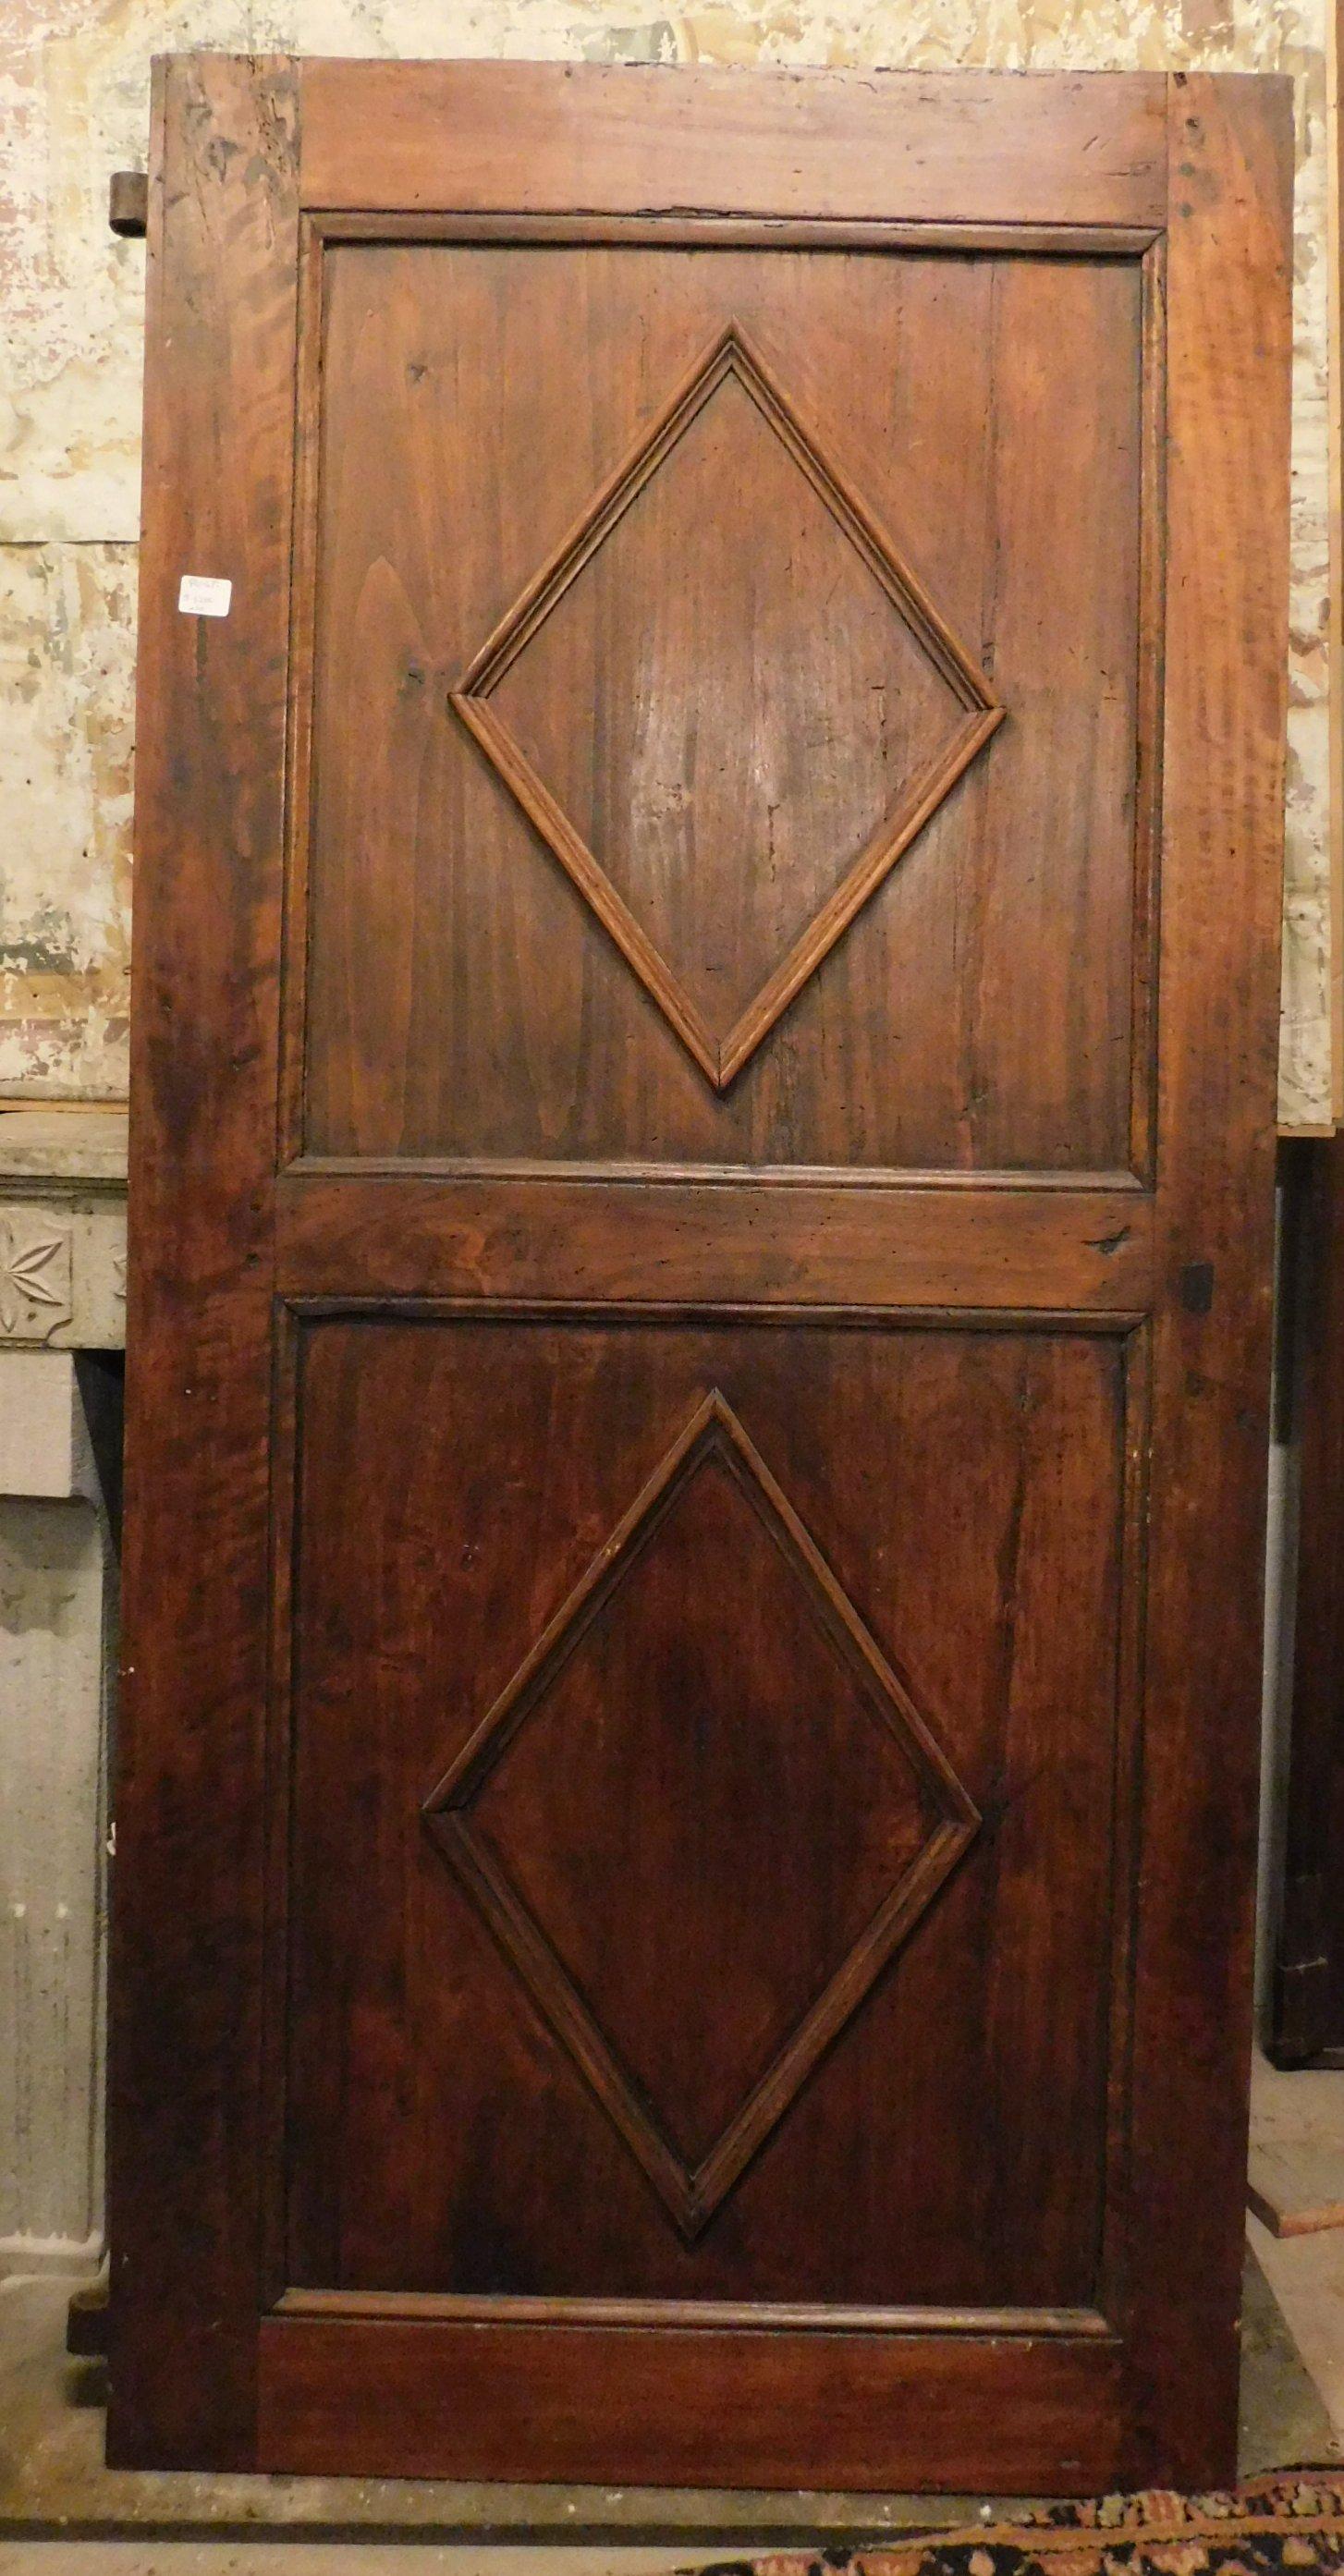 Ancient restored poplar door, with lozenges carved on the surface, built in the 18th century in Italy.
Hand-sculpted, it still has its original hinges for push opening from the left, finished back.
Measure cm w 87 x h 187 x t 3.